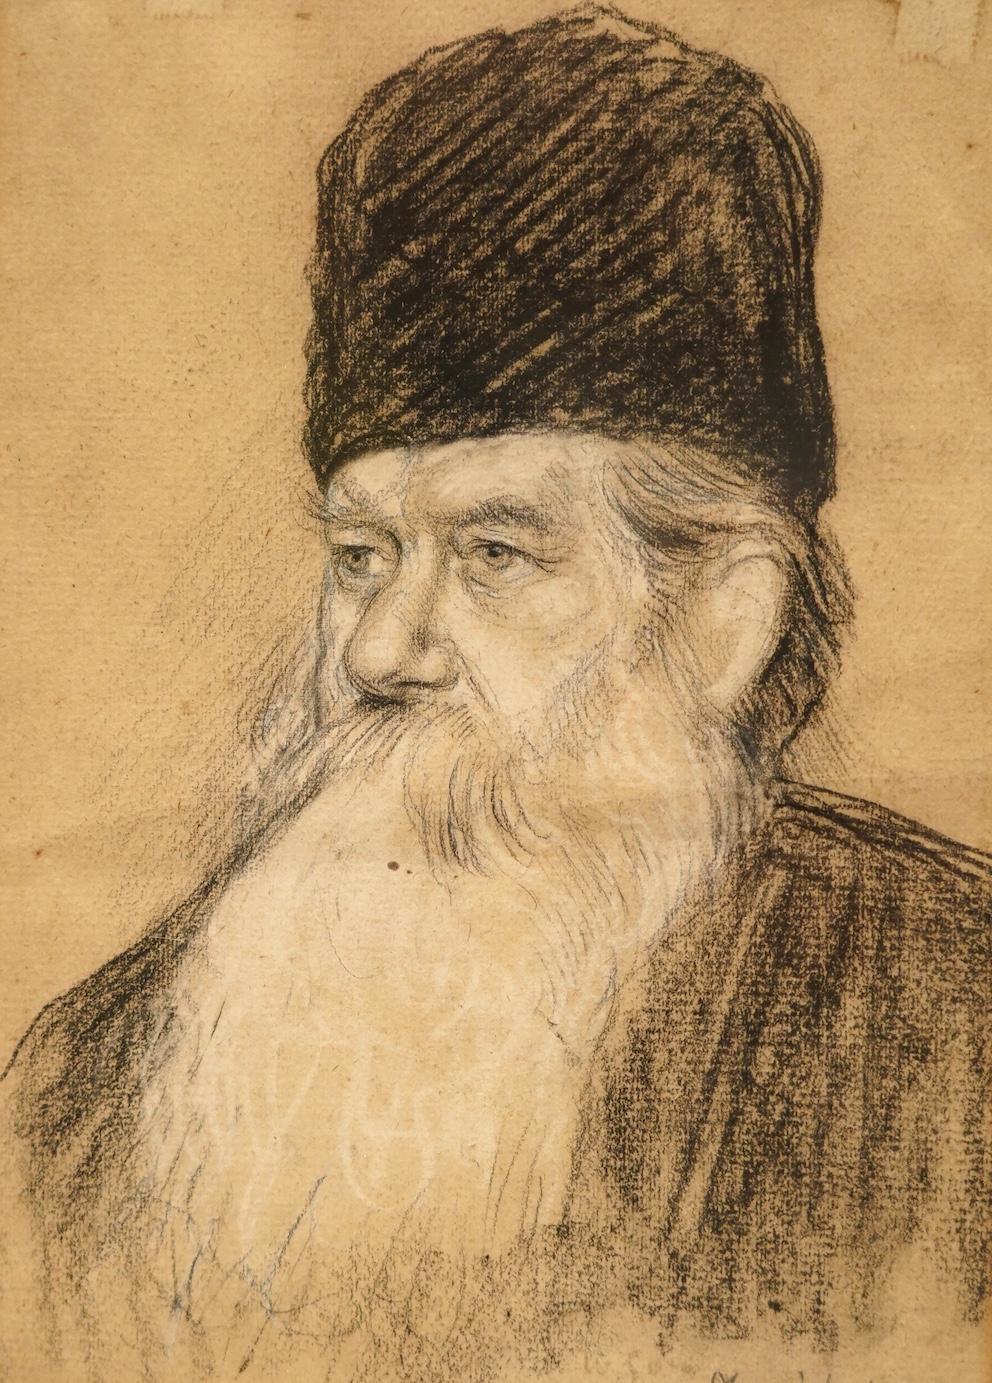 Marnick, heightened charcoal, Portrait of a bearded Russian gentleman, signed and dated 1908, 22.5 x 16cm. Condition - poor